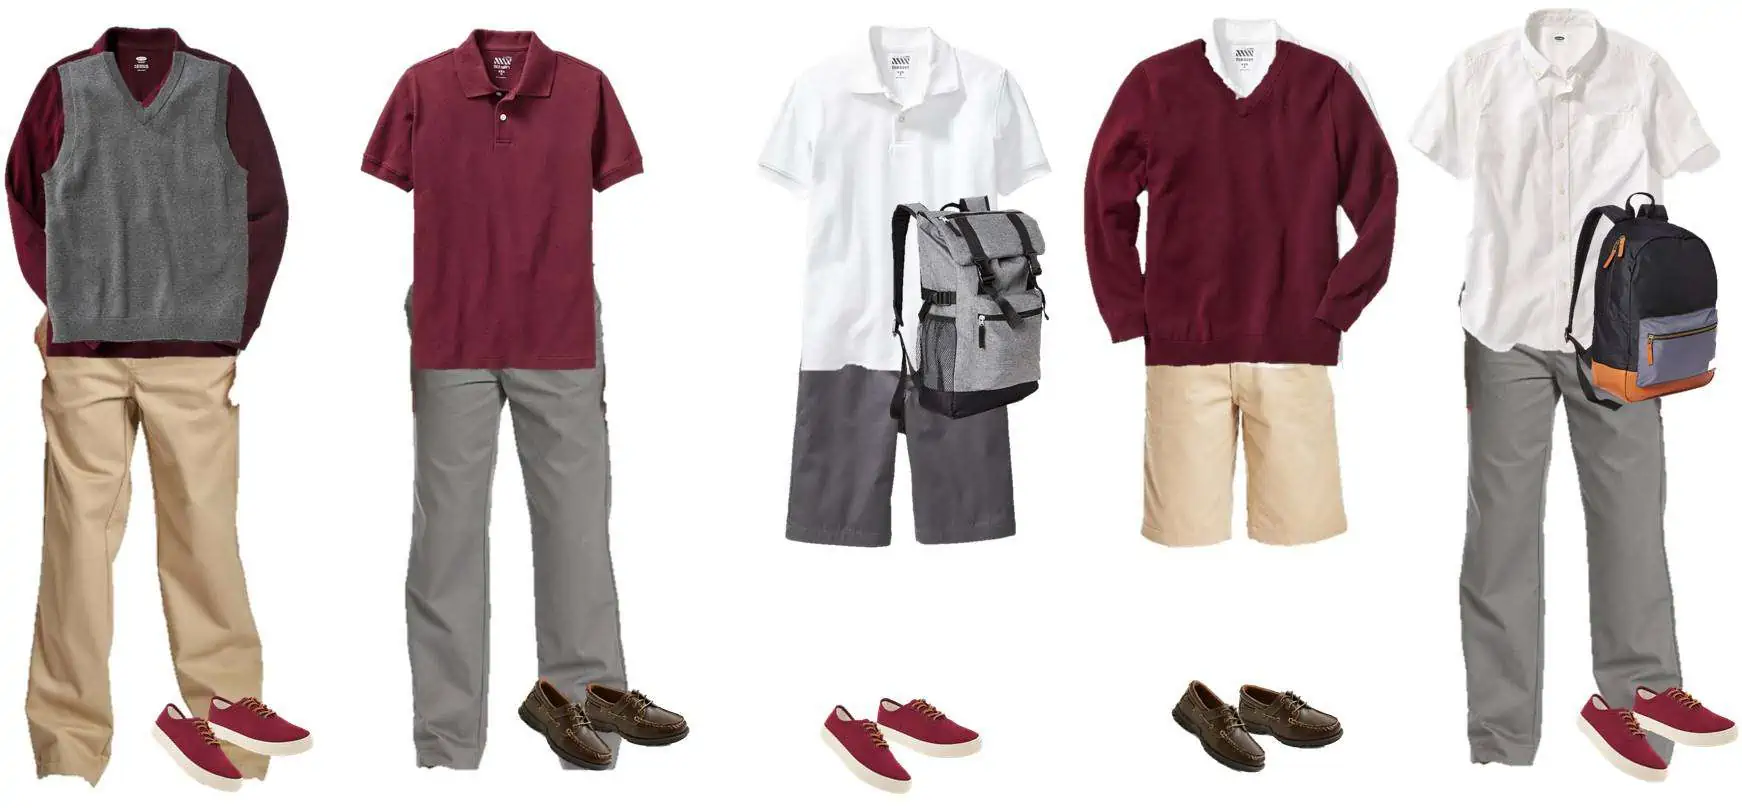 Mix & Match School Uniforms for Boys from Old Navy